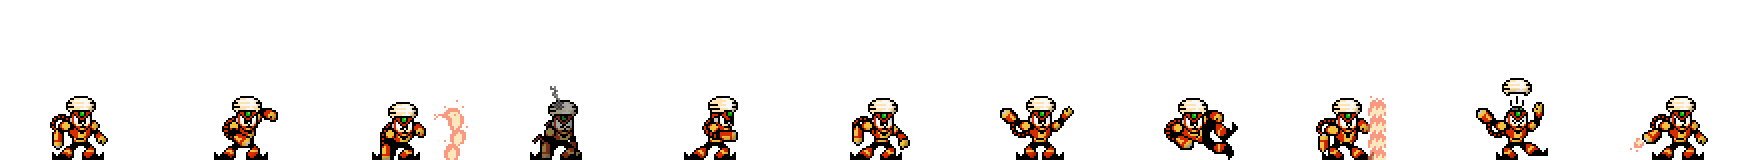 Flame Man | Base Sprite Right